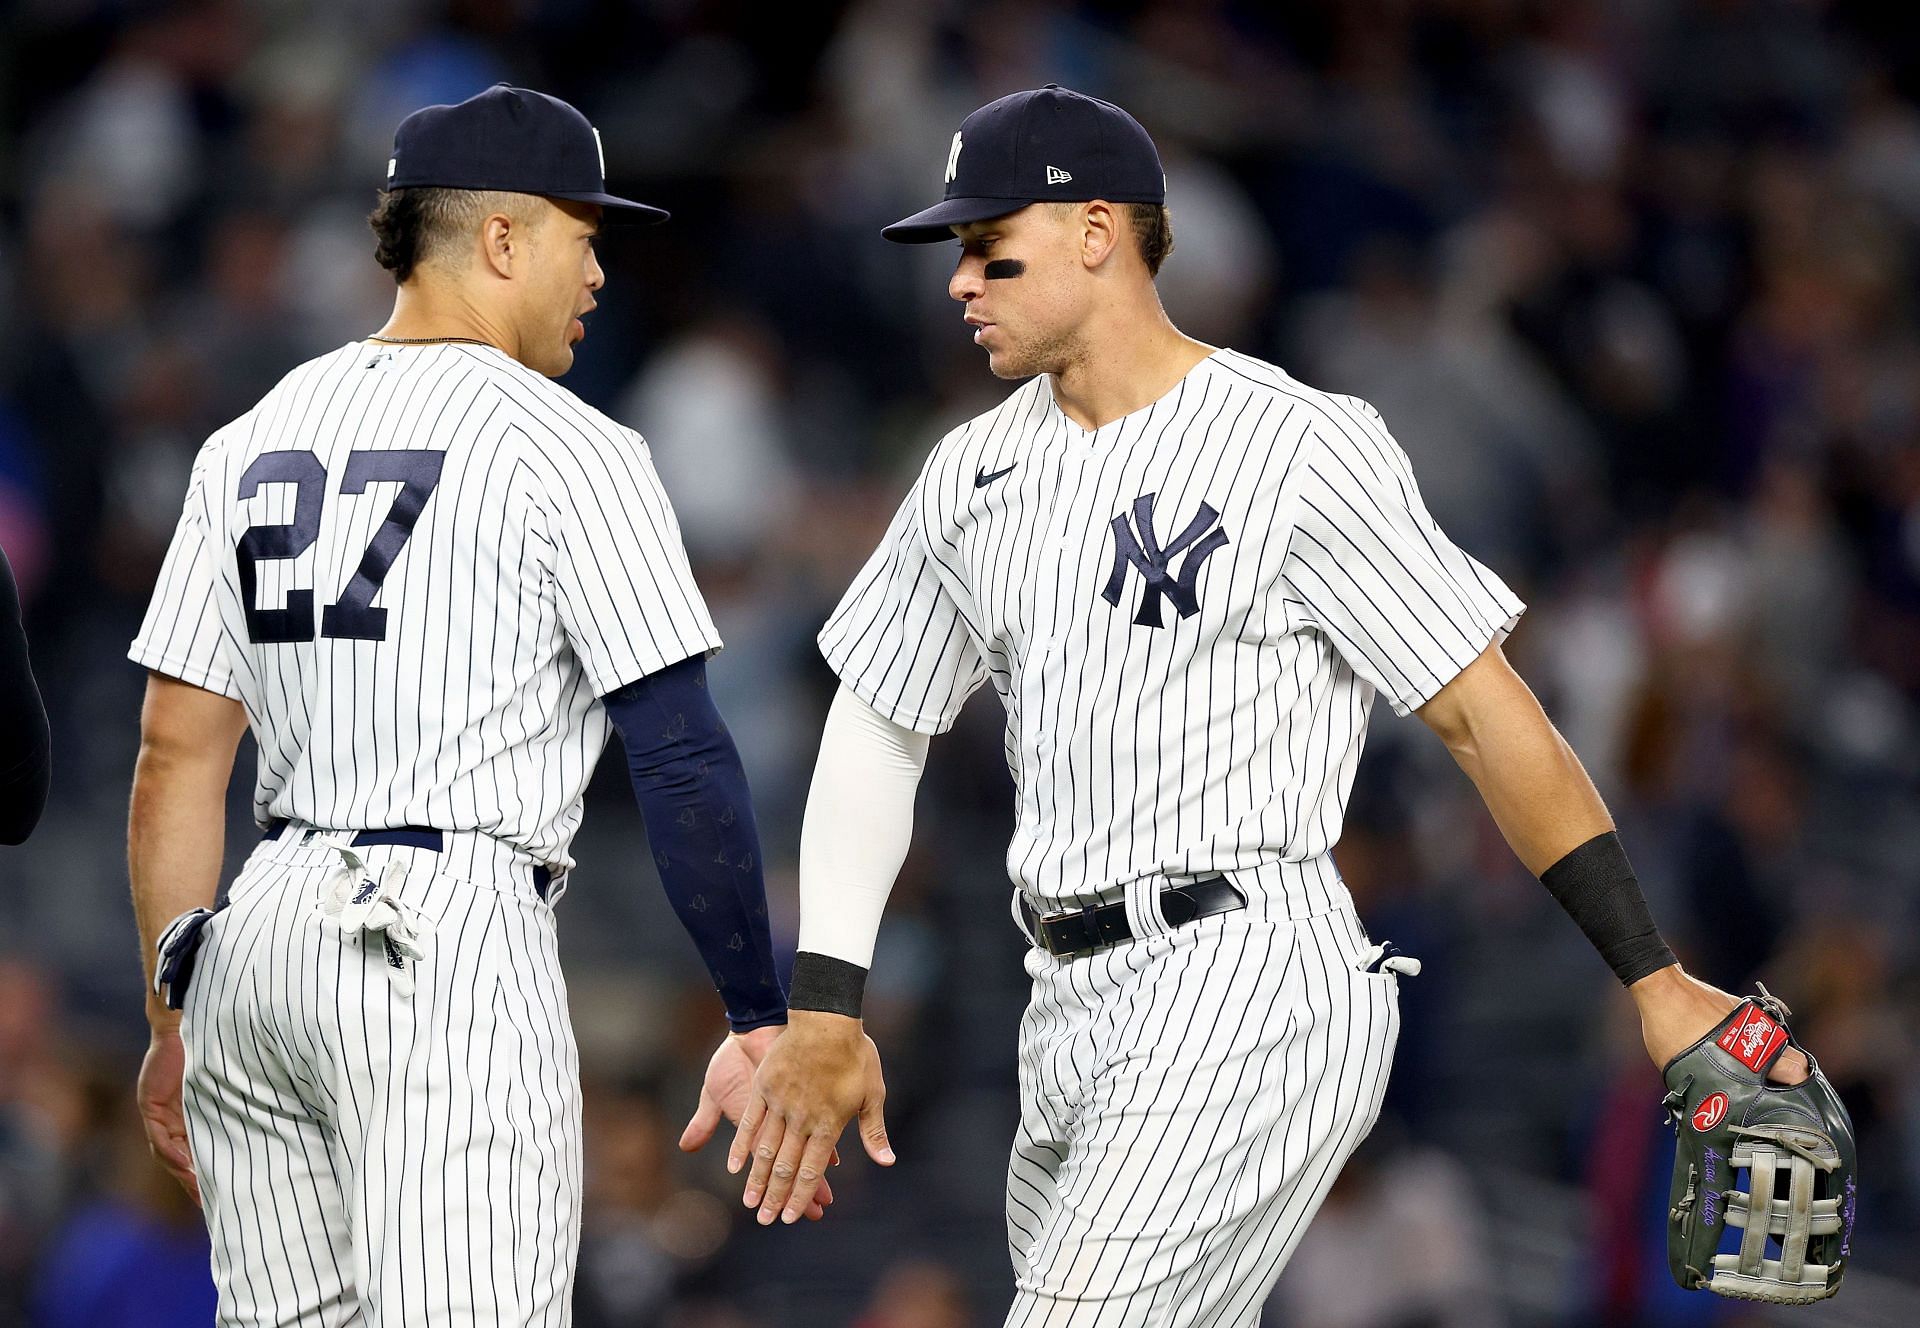 Giancarlo Stanton(left) and Aaron Judge(right) celebrate after a win against the Cleveland Guardians. Cleveland Guardians v New York Yankees